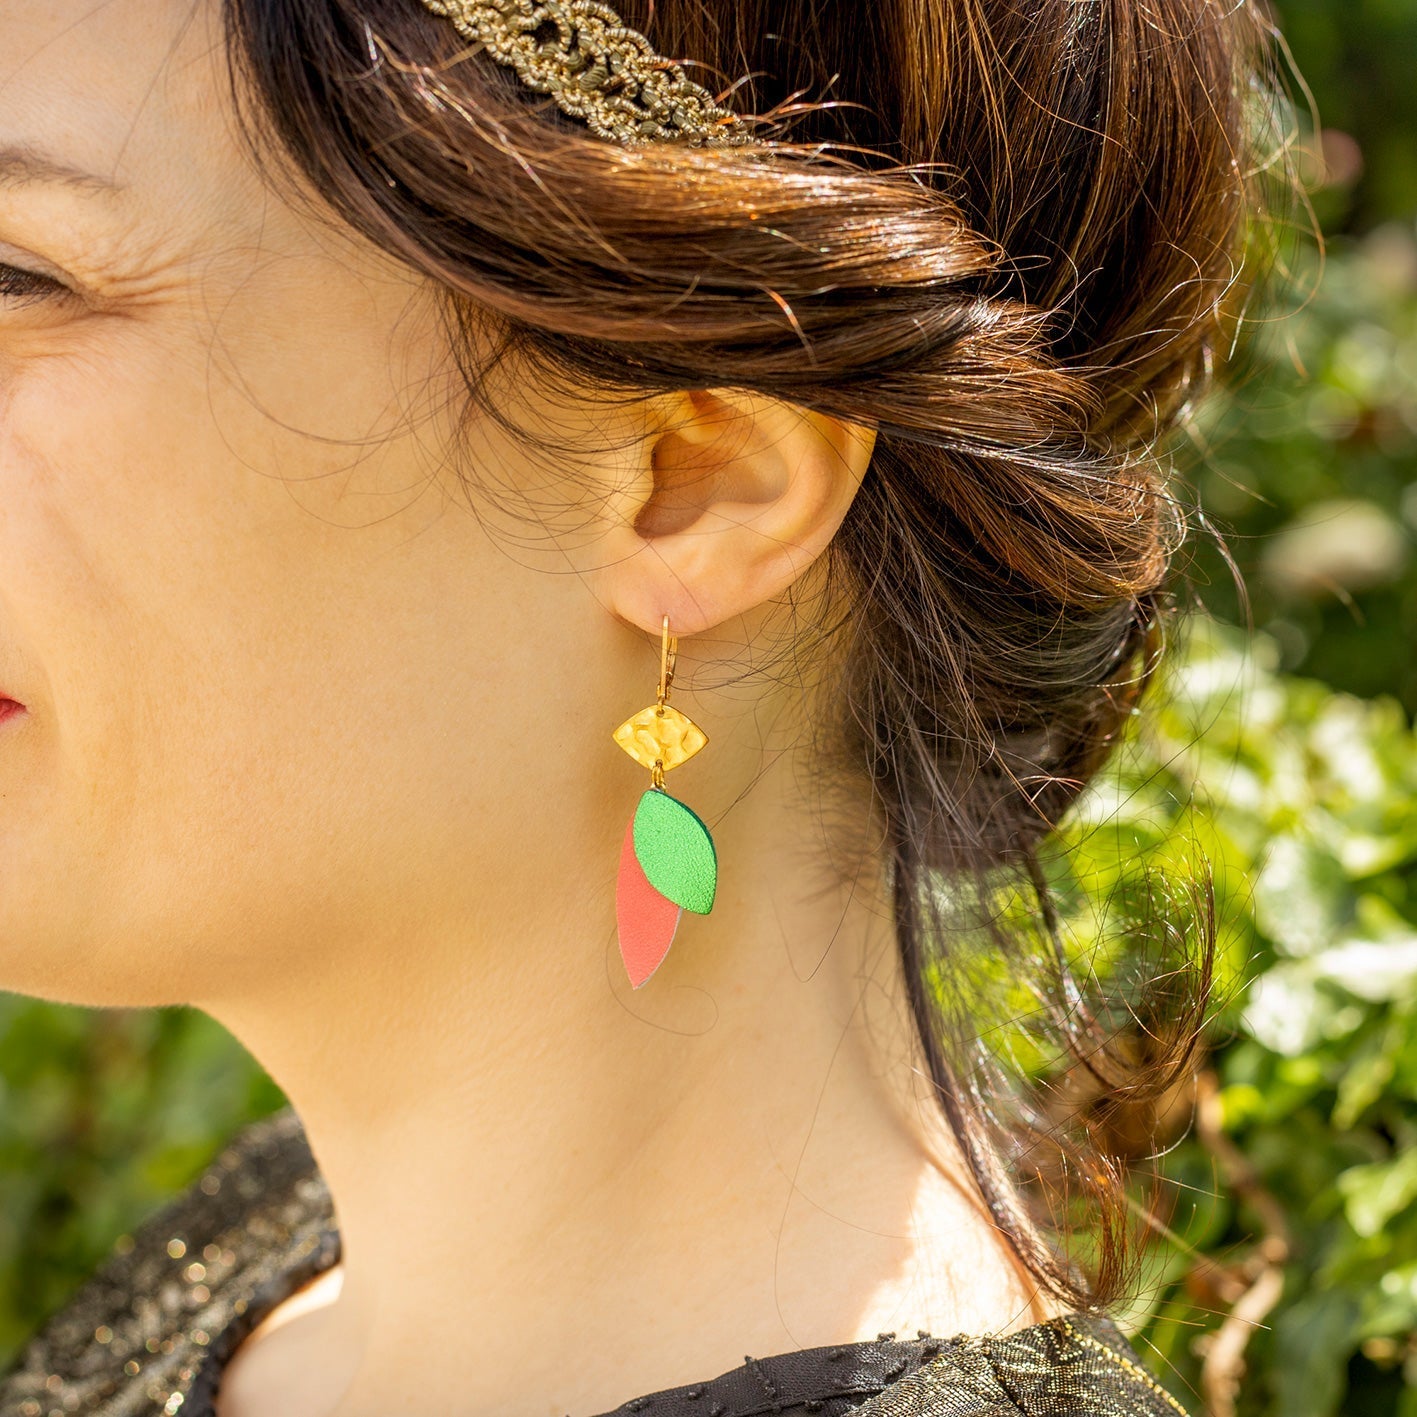 Lozaa earrings - gold and black leather petals